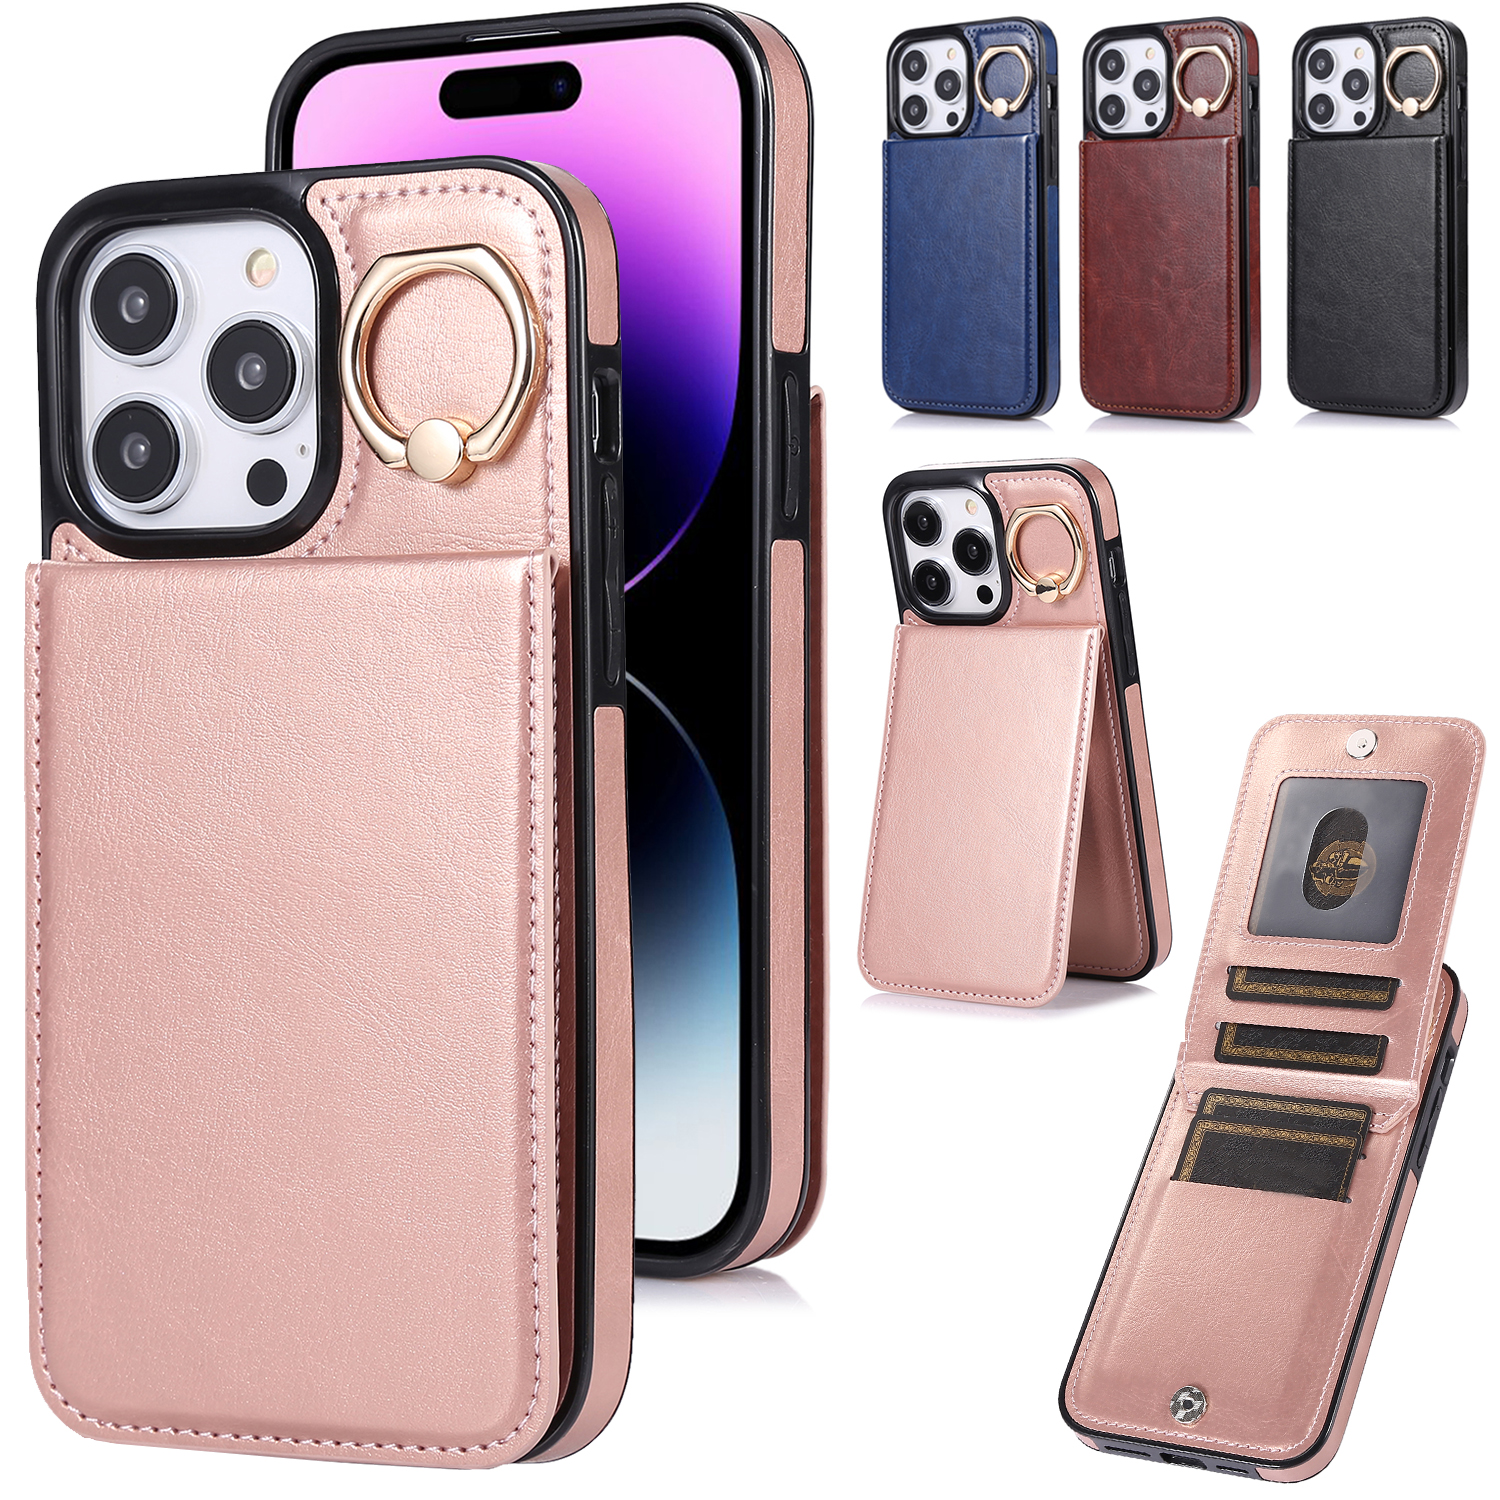 Personalise Gold Silver Initial Letters Leather PU Soft Case For Iphone 14  12 Pro Xs Max 13 Mini 11 X XR 7 8 Plus Luxury Covers